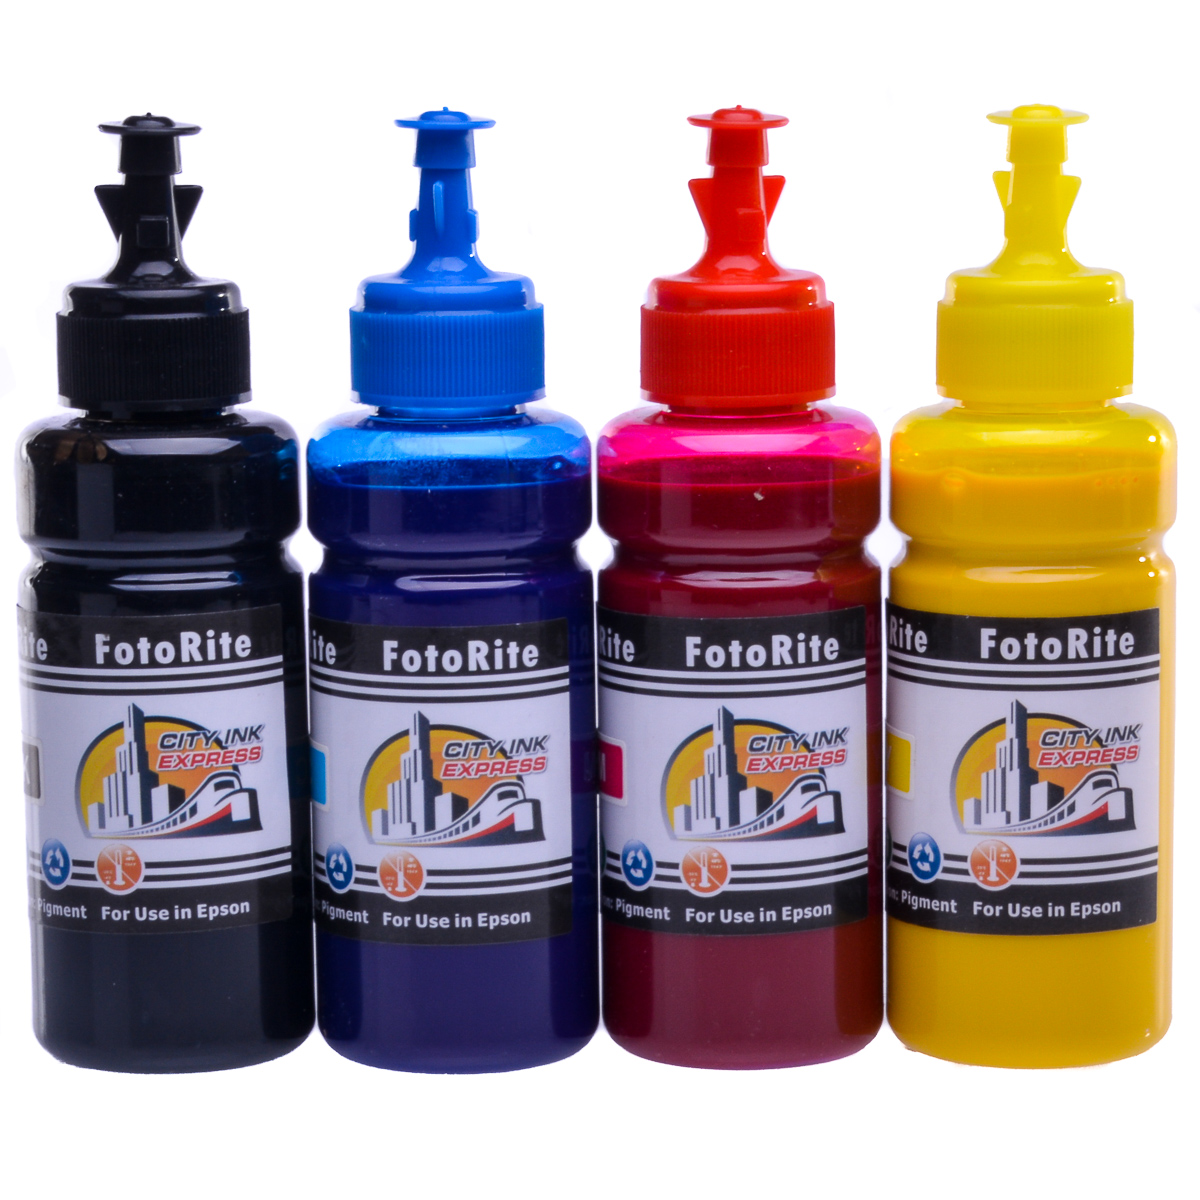 Cheap Multipack pigment ink refill replaces Epson XP-3155